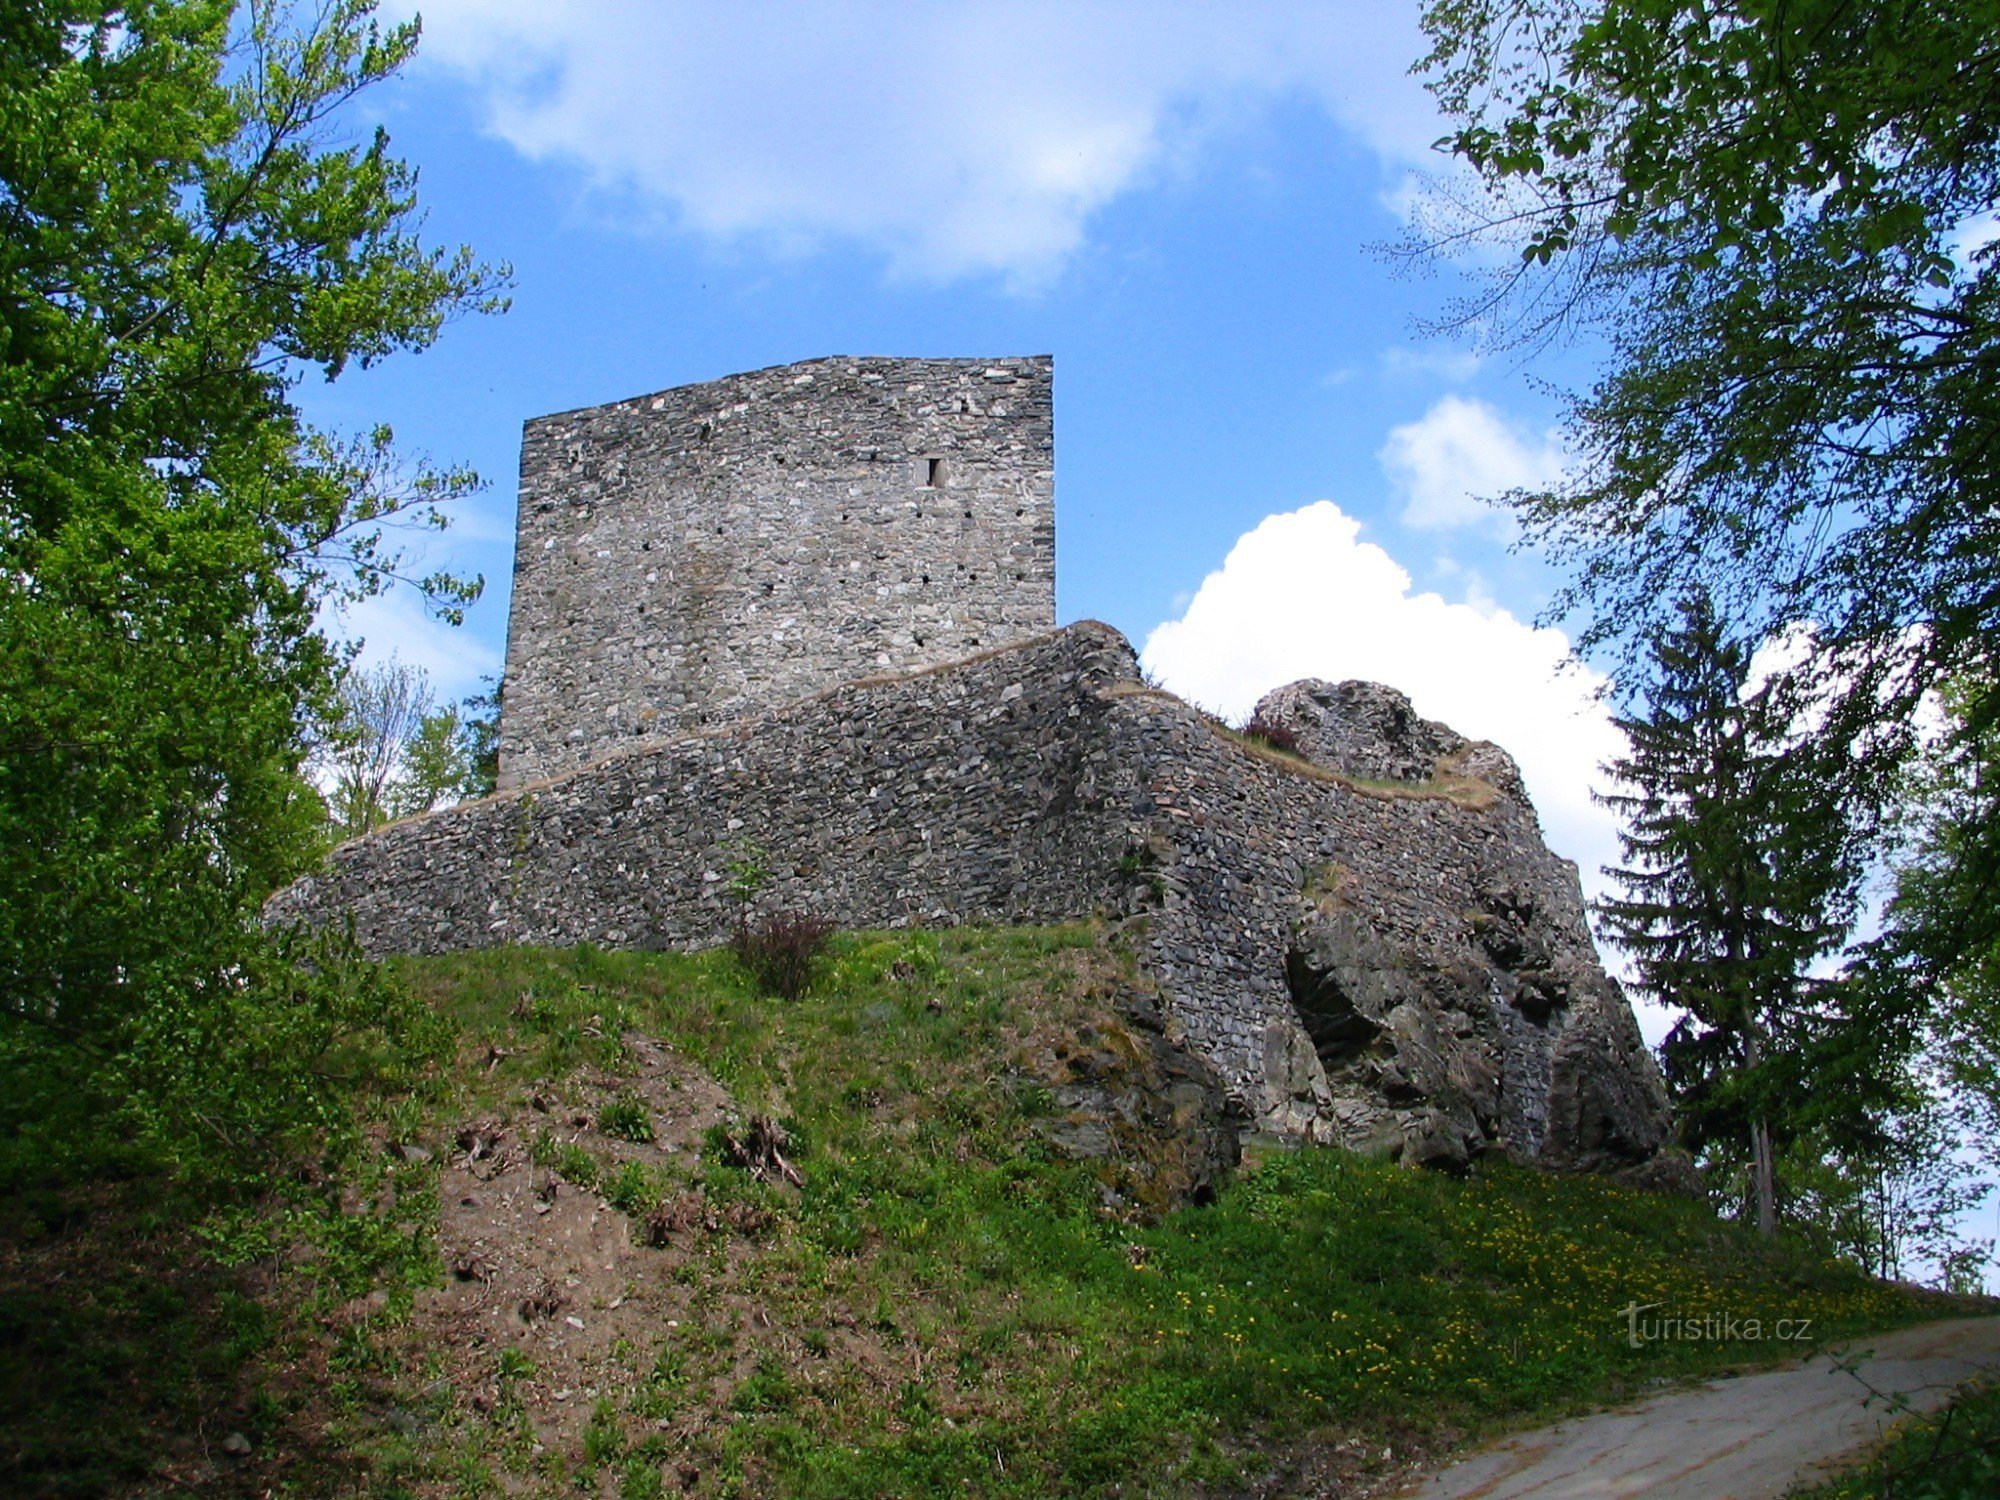 Southern outpost bastion